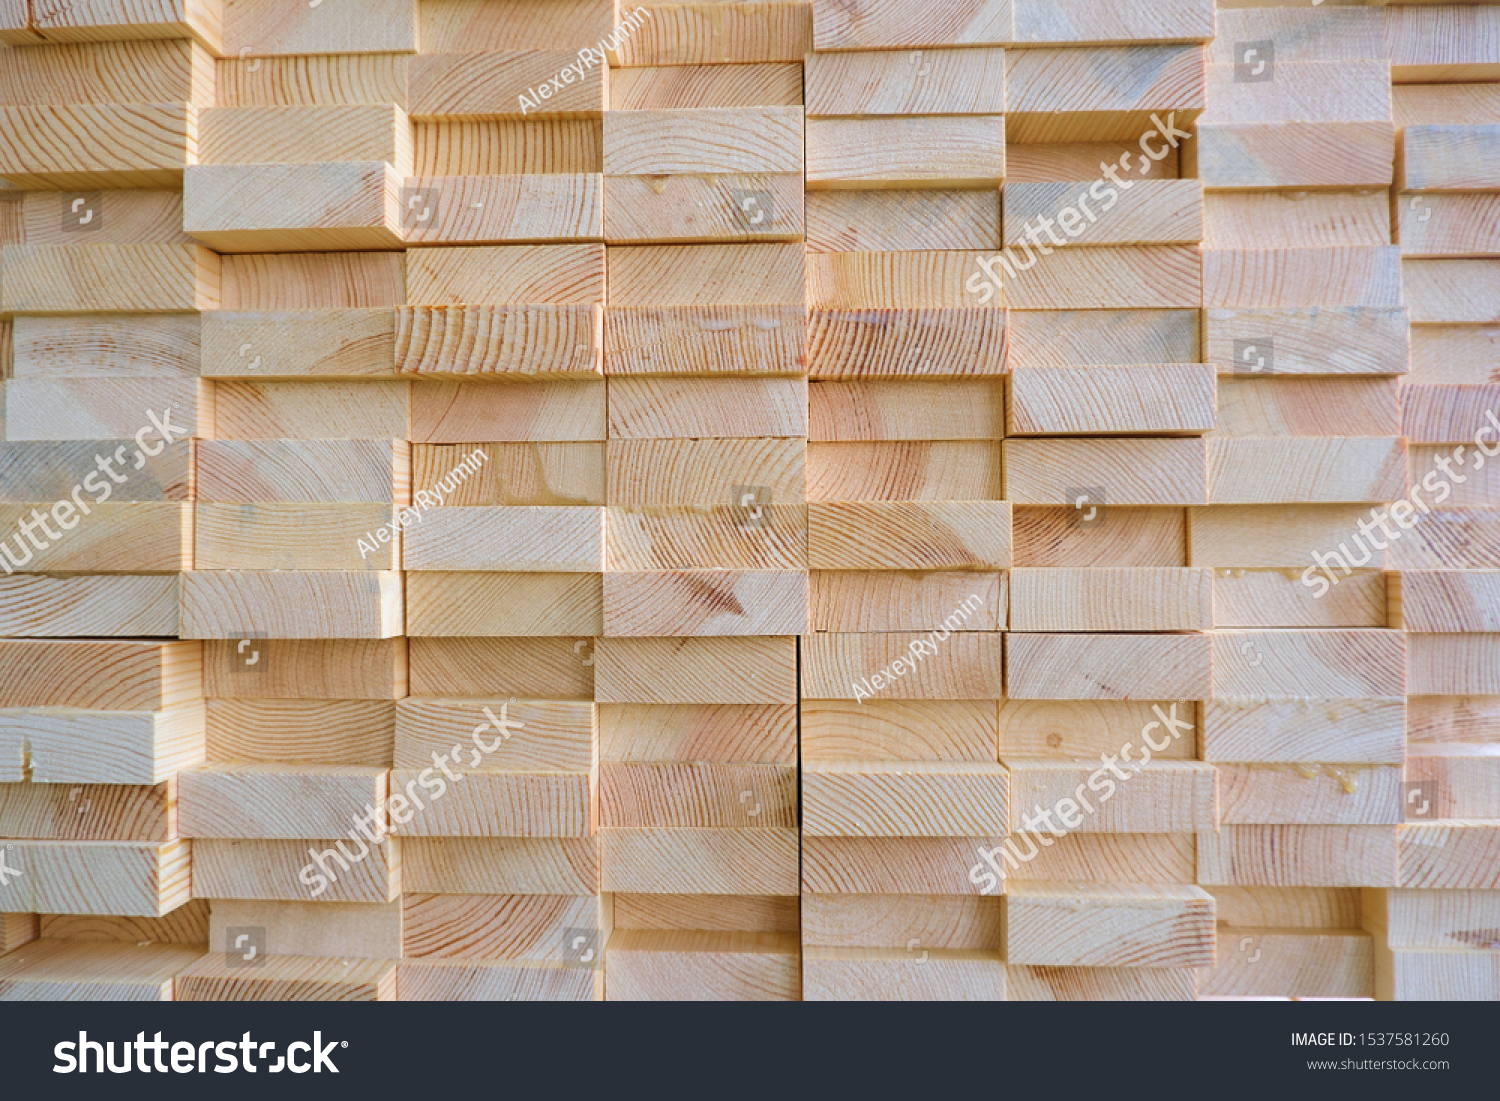 Stack of three-layer wooden glued laminated timber beams from pine finger joint spliced boards #1537581260